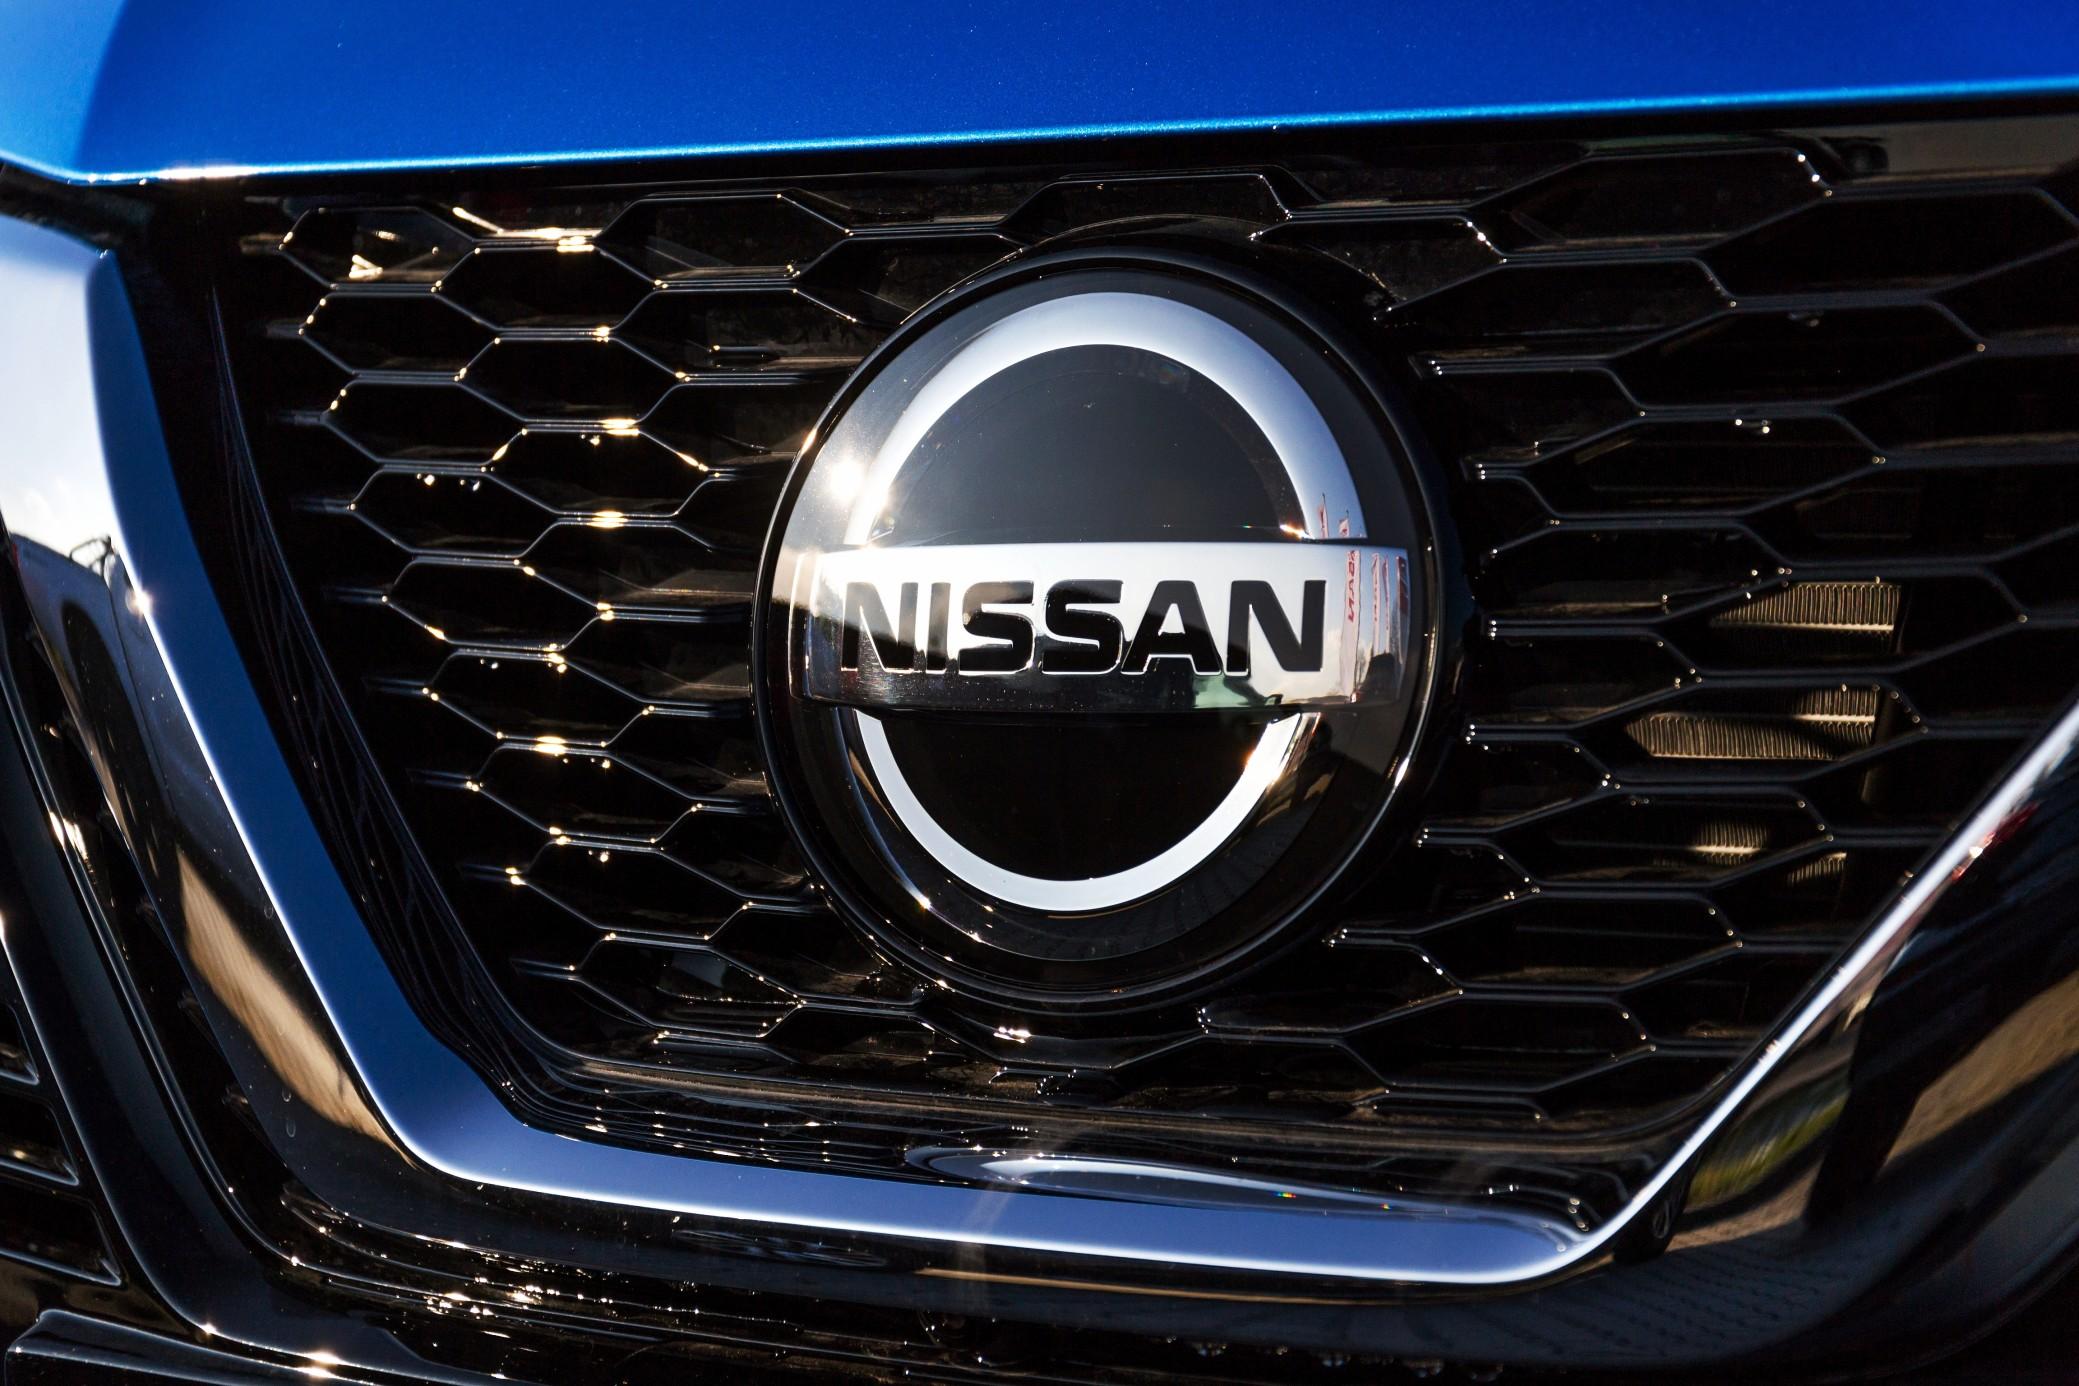 Former Nissan CEO Carlos Ghosn had some less-than-stellar things to say about his old company.